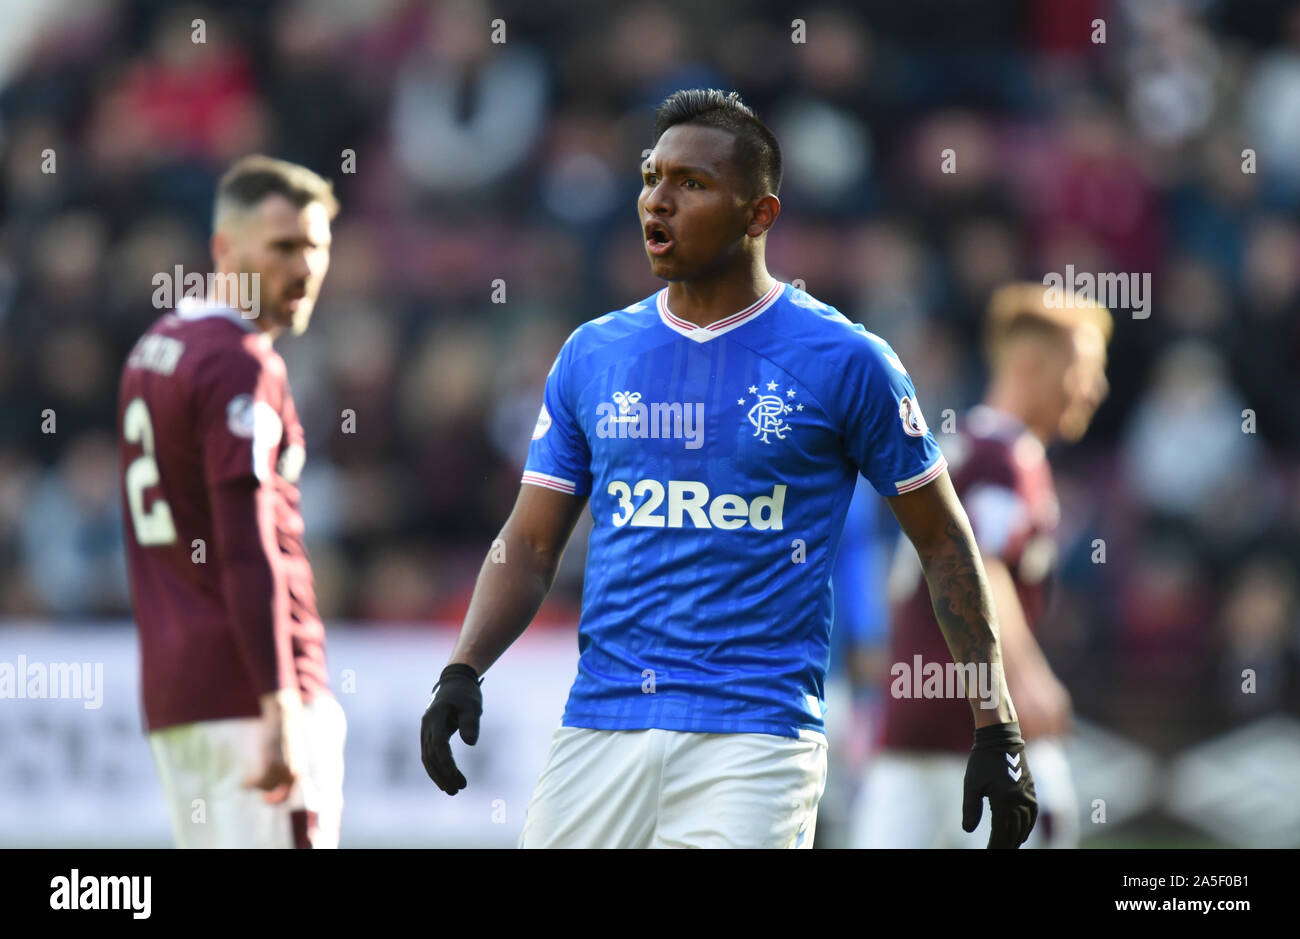 Tynecastle Park, Edinburgh, Scotland, UK. 20th Oct, 2019. Hearts vs Rangers Scottish Premiership Match, Alfredo Morelos was allegedly targeted by sickening racist abuse at Tynecastle. Credit: eric mccowat/Alamy Live News Stock Photo